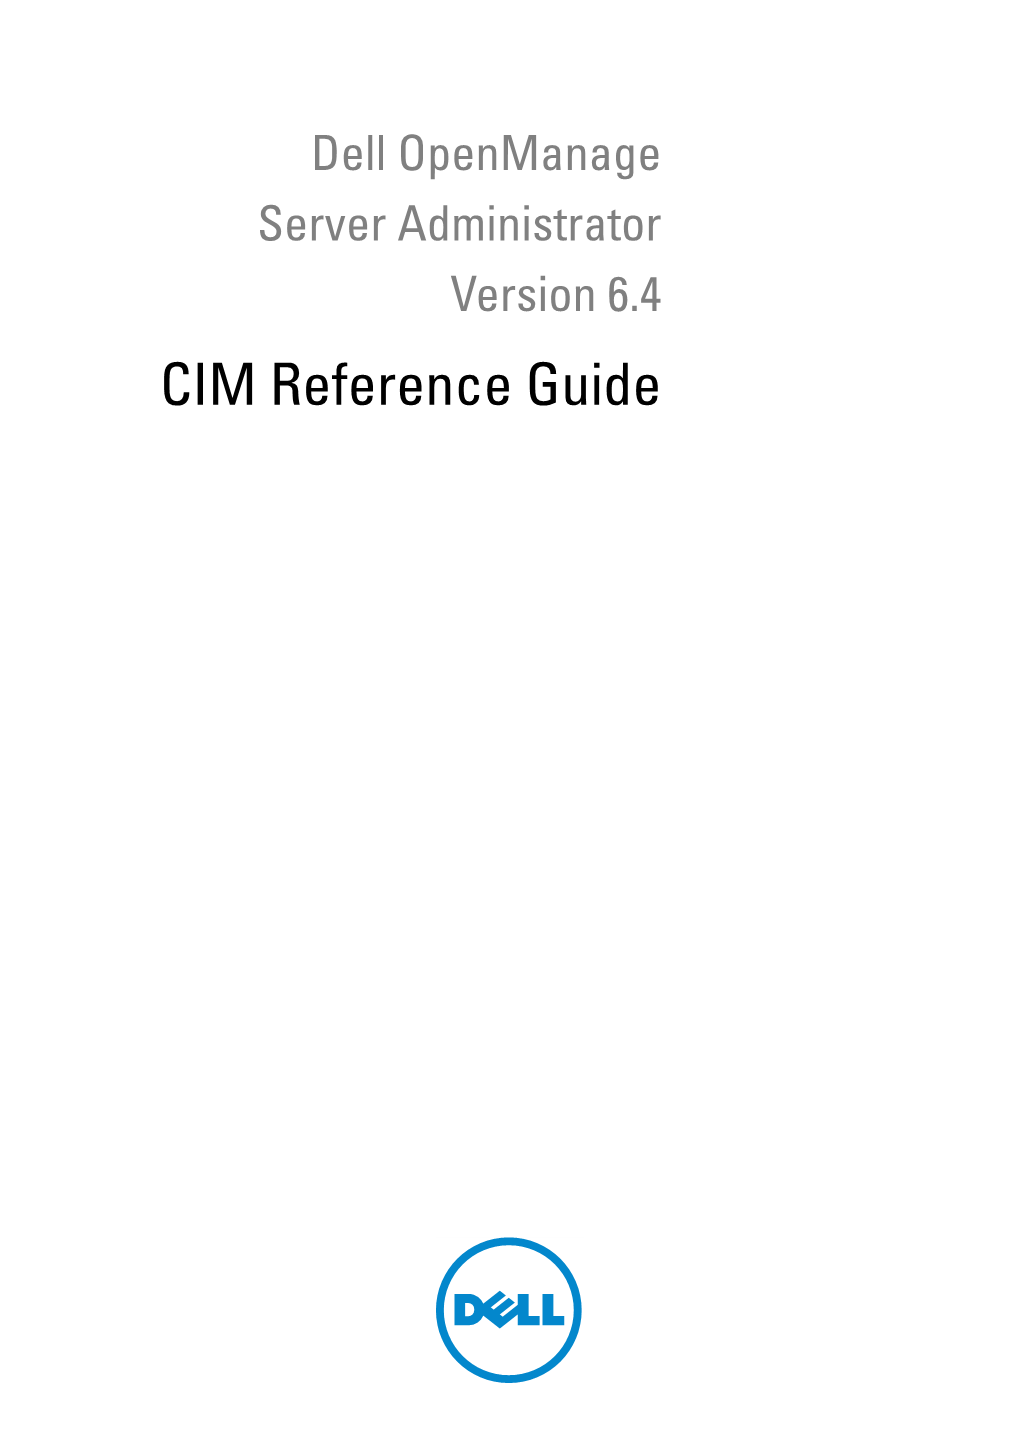 Dell Openmanage Server Administrator Version 6.4 CIM Reference